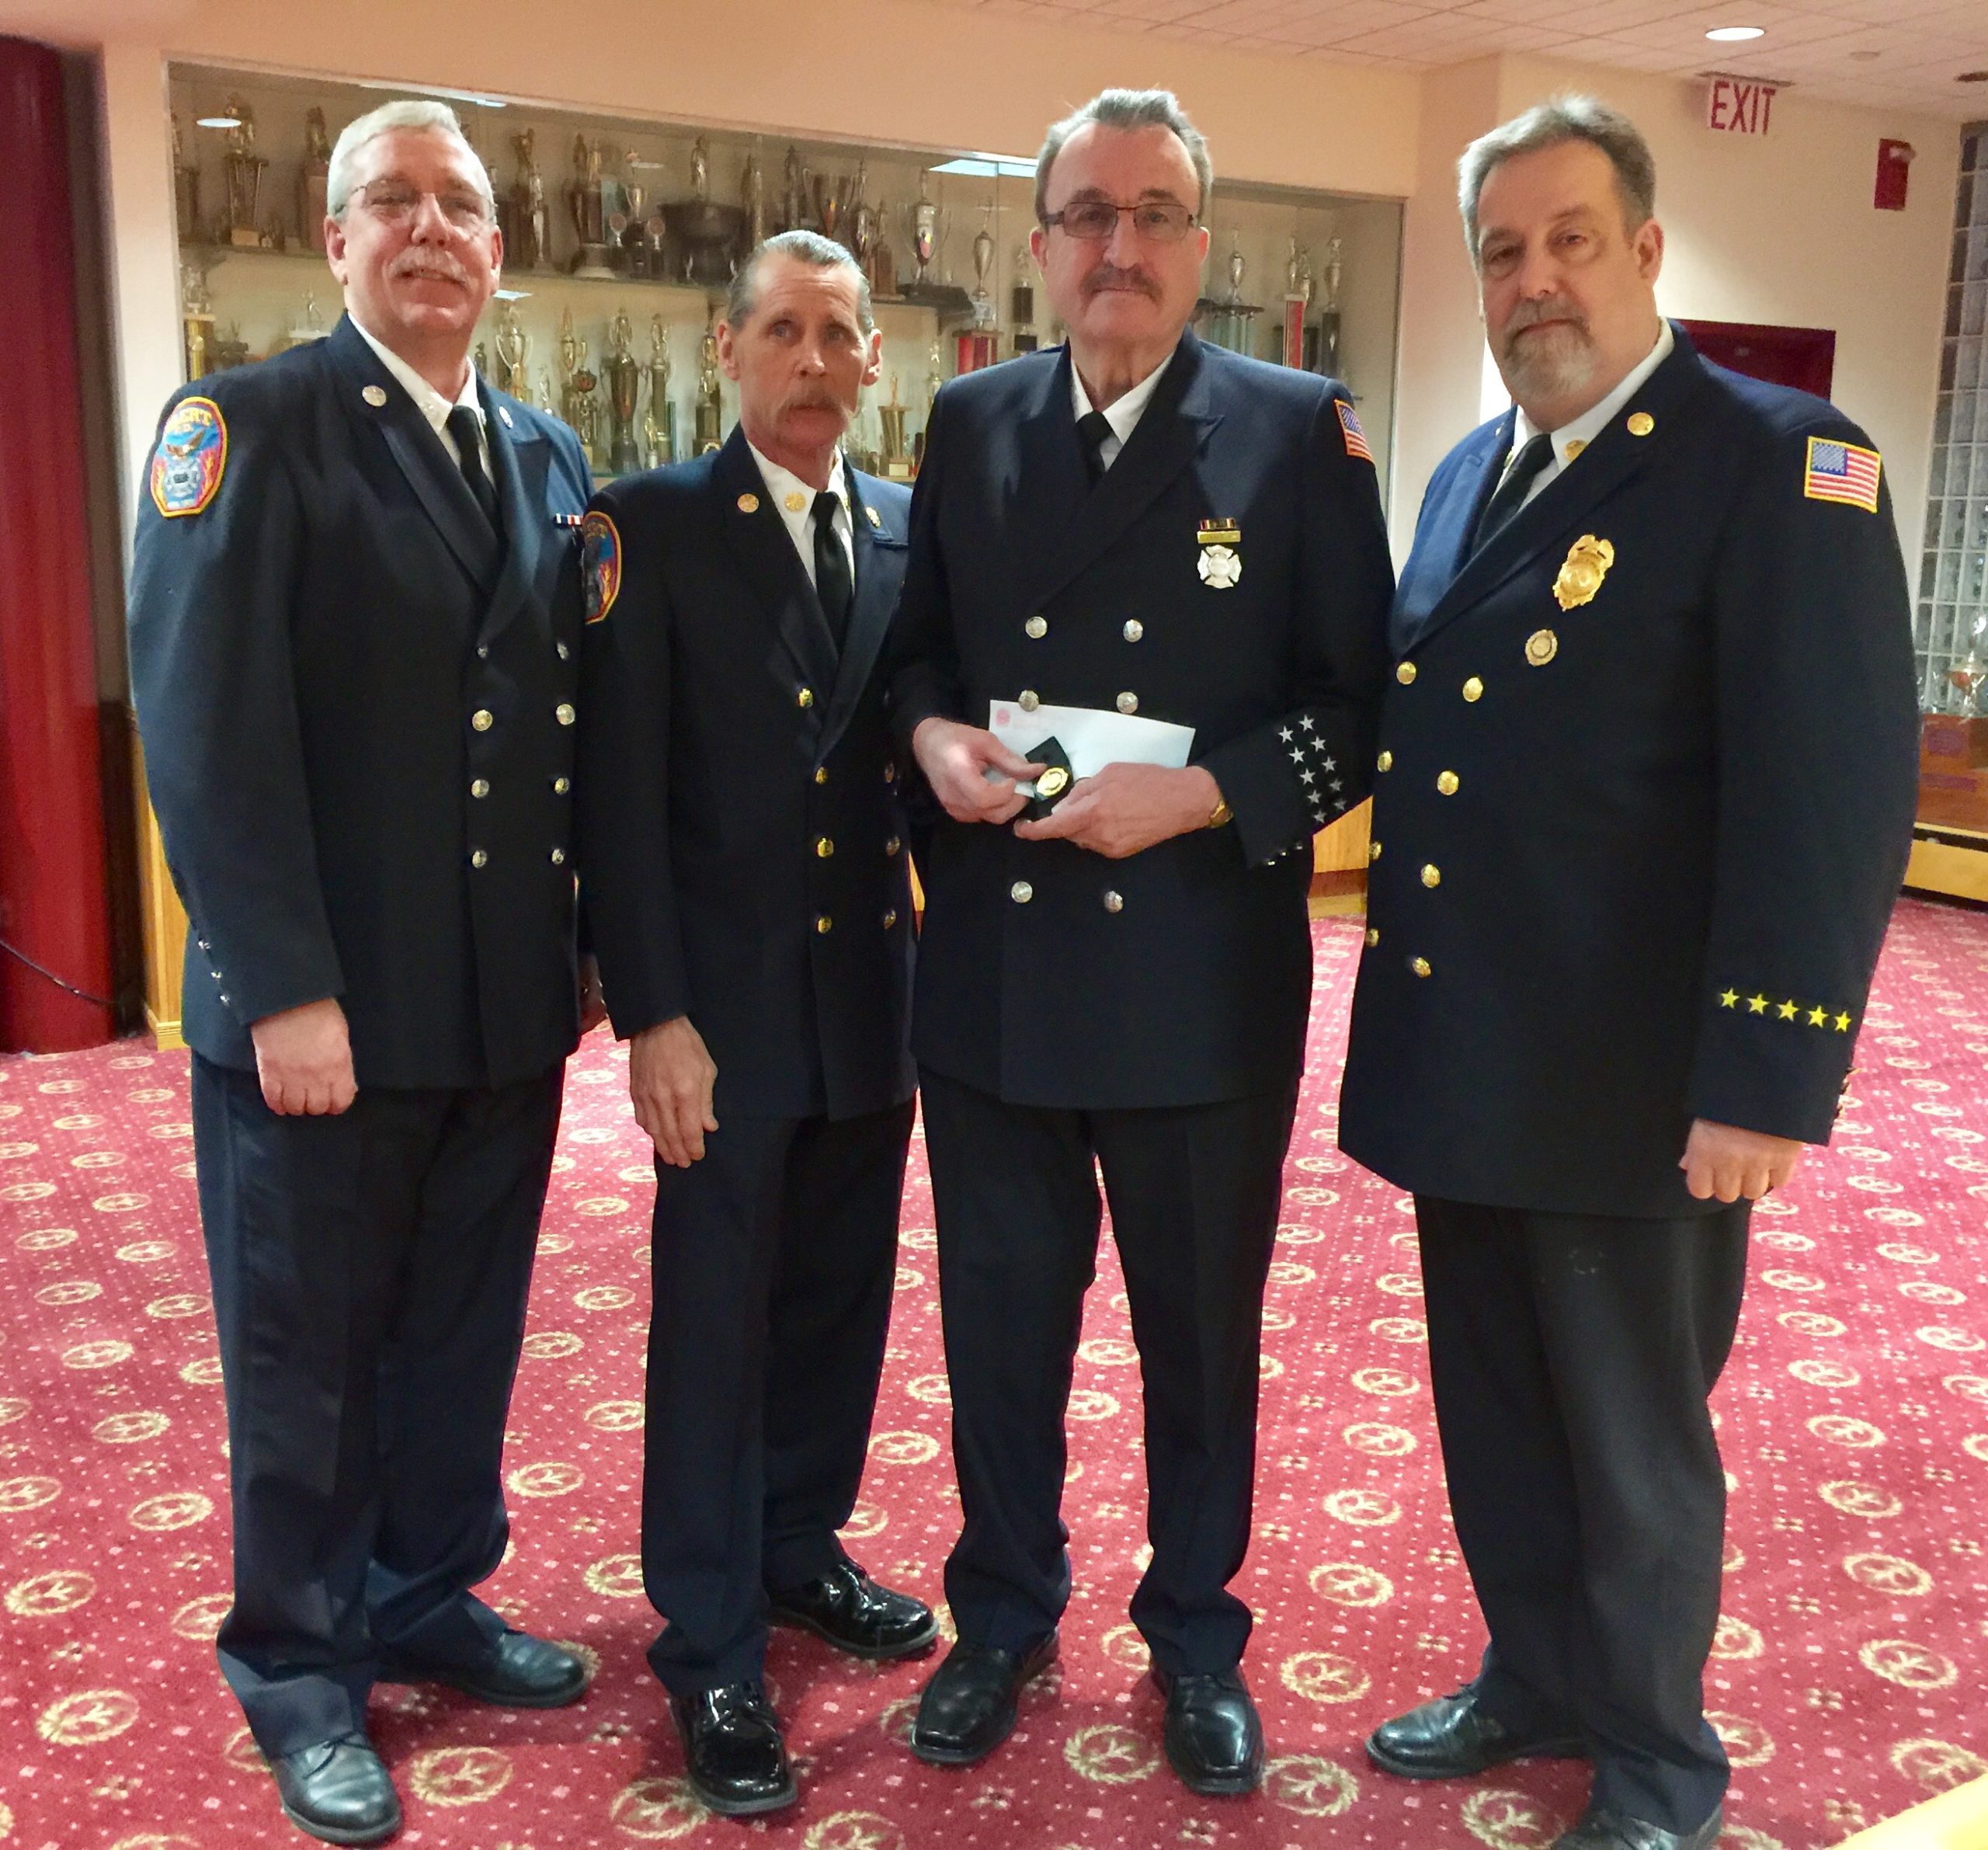 Trustee William McGirr, Chief Steve Schwartz, James Lawrence and President Michael Berry. (Photo courtesy of Great Neck Alert Fire Company)